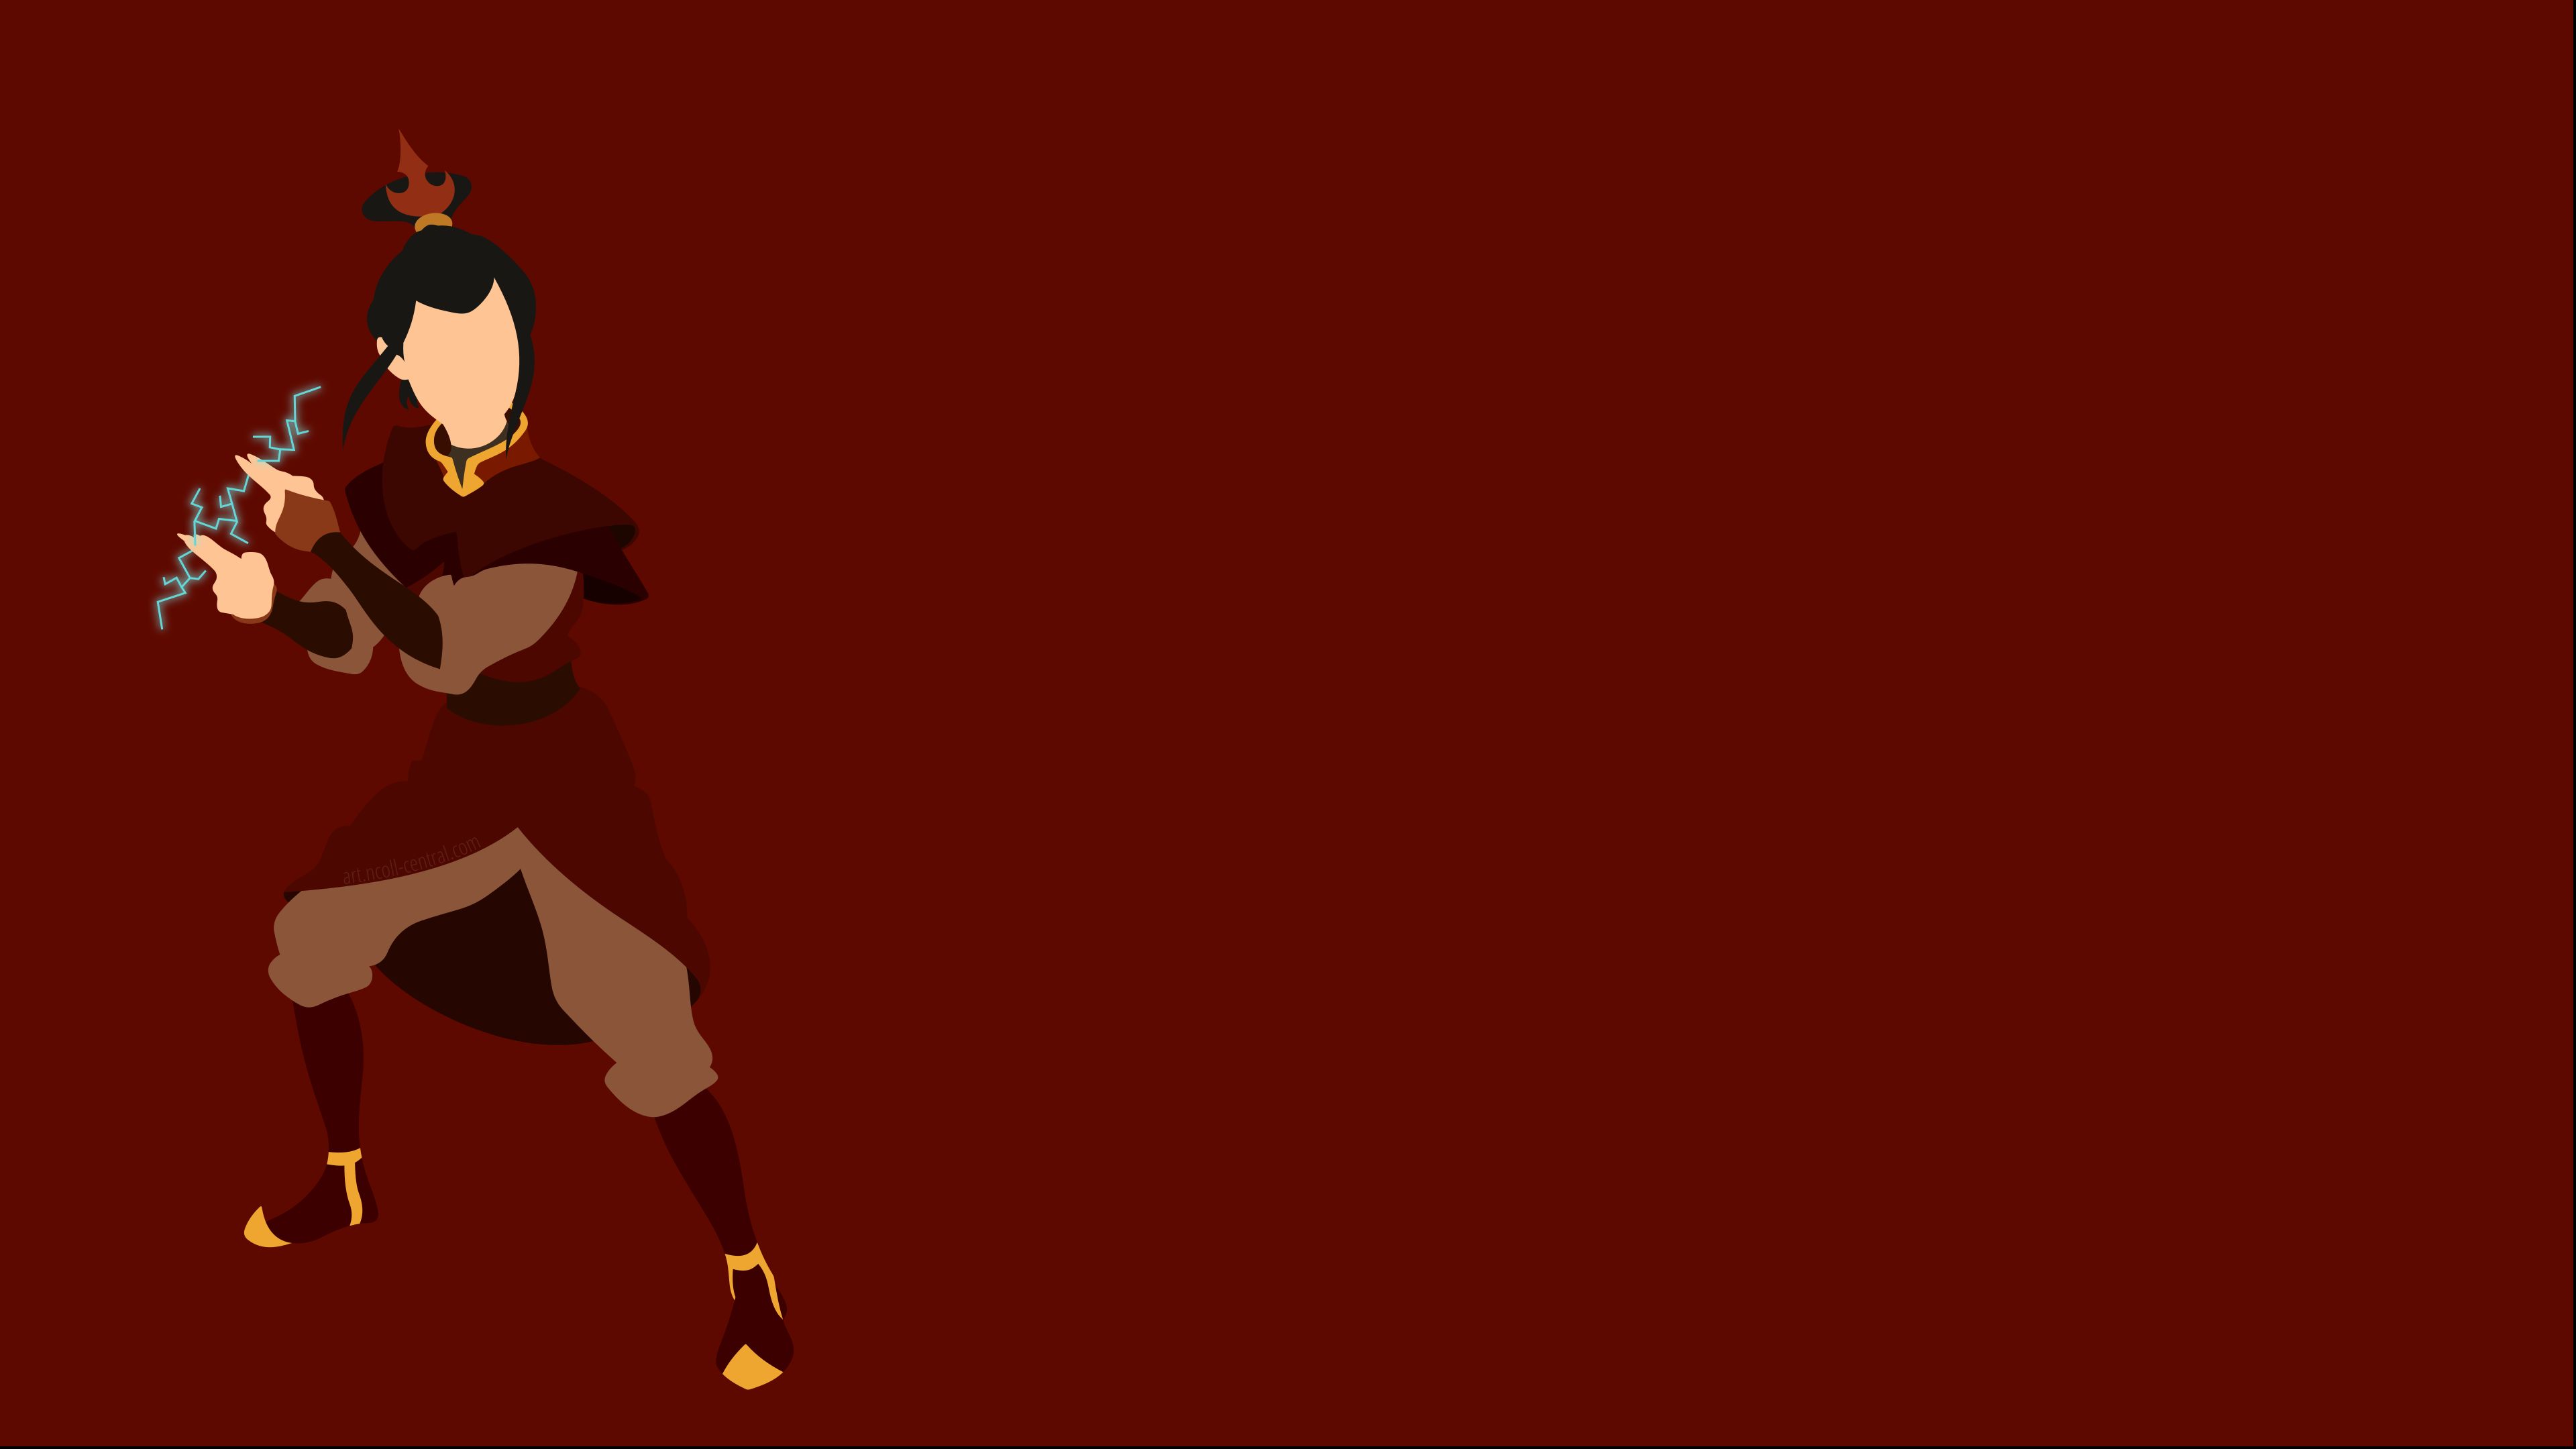 Azula avatar s for desktop download free azula avatar pictures and backgrounds for pc